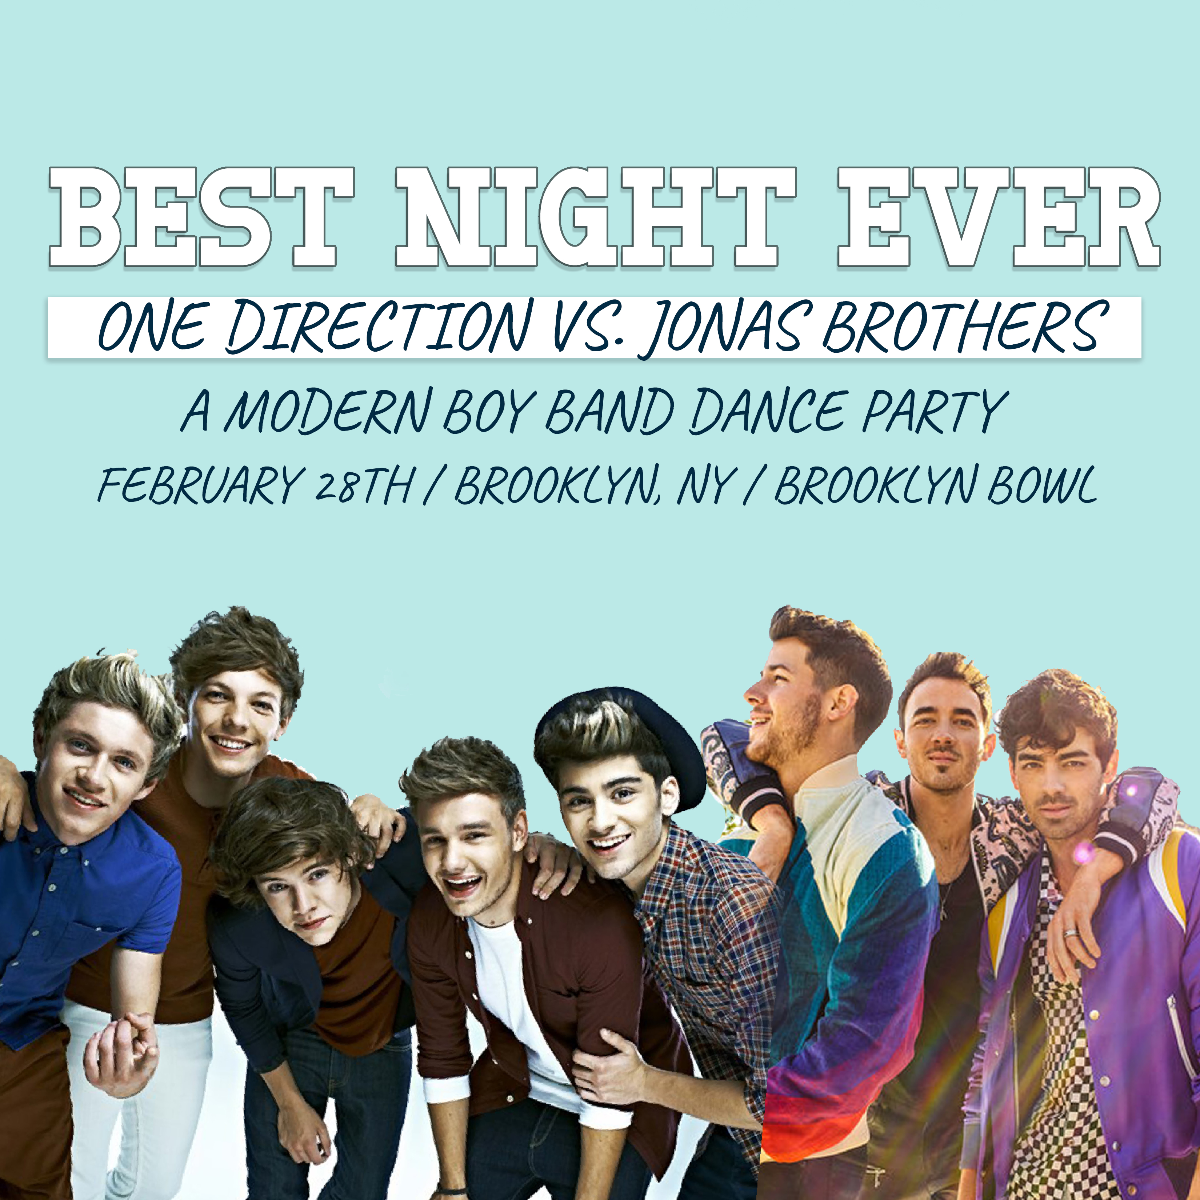 Best Night Ever: One Direction vs Jonas Brothers